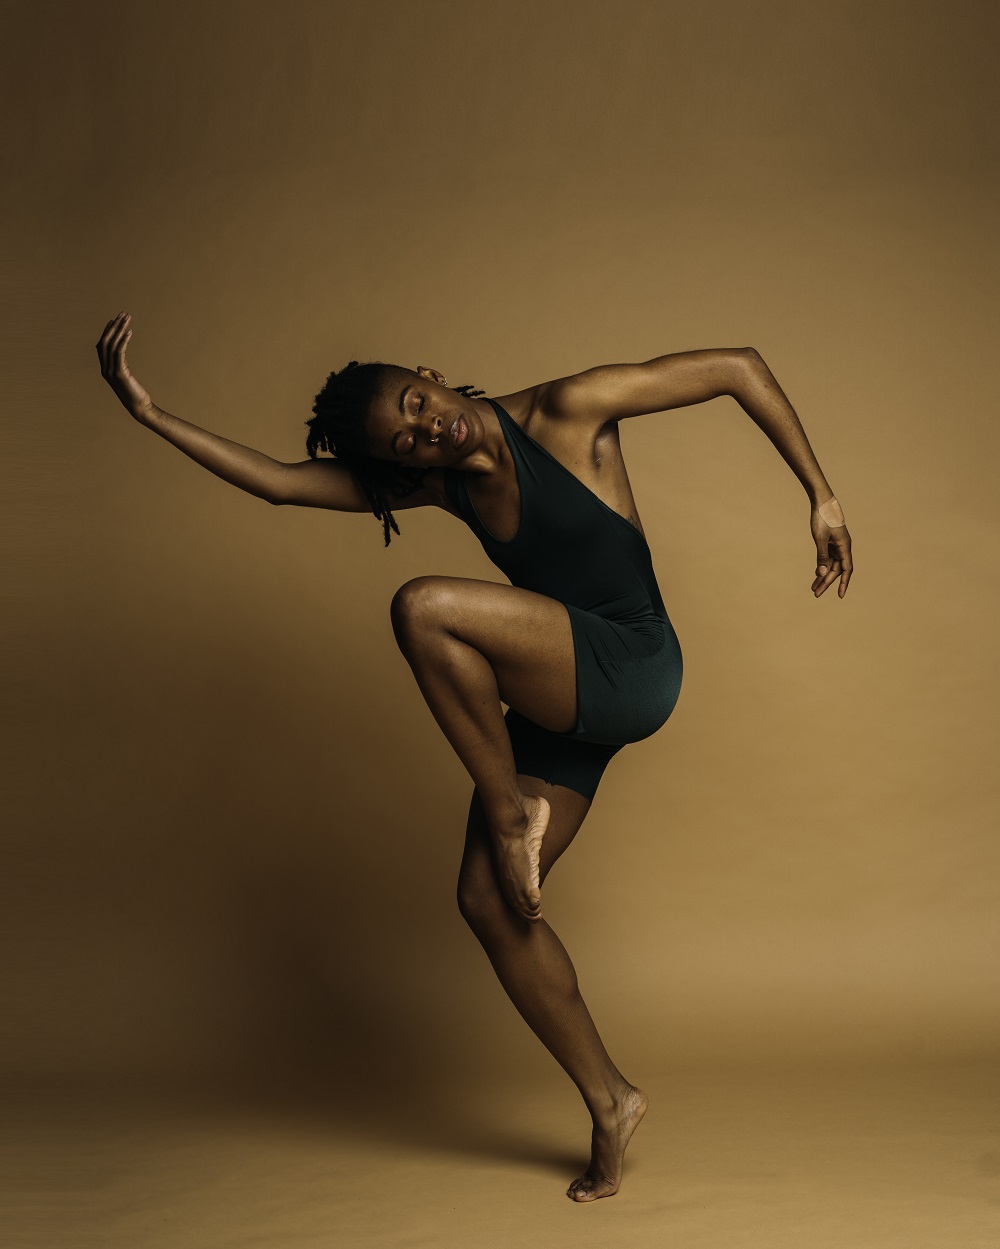 Winifred Haun & Dancers and Banks Performance Project present “Carry us forward”